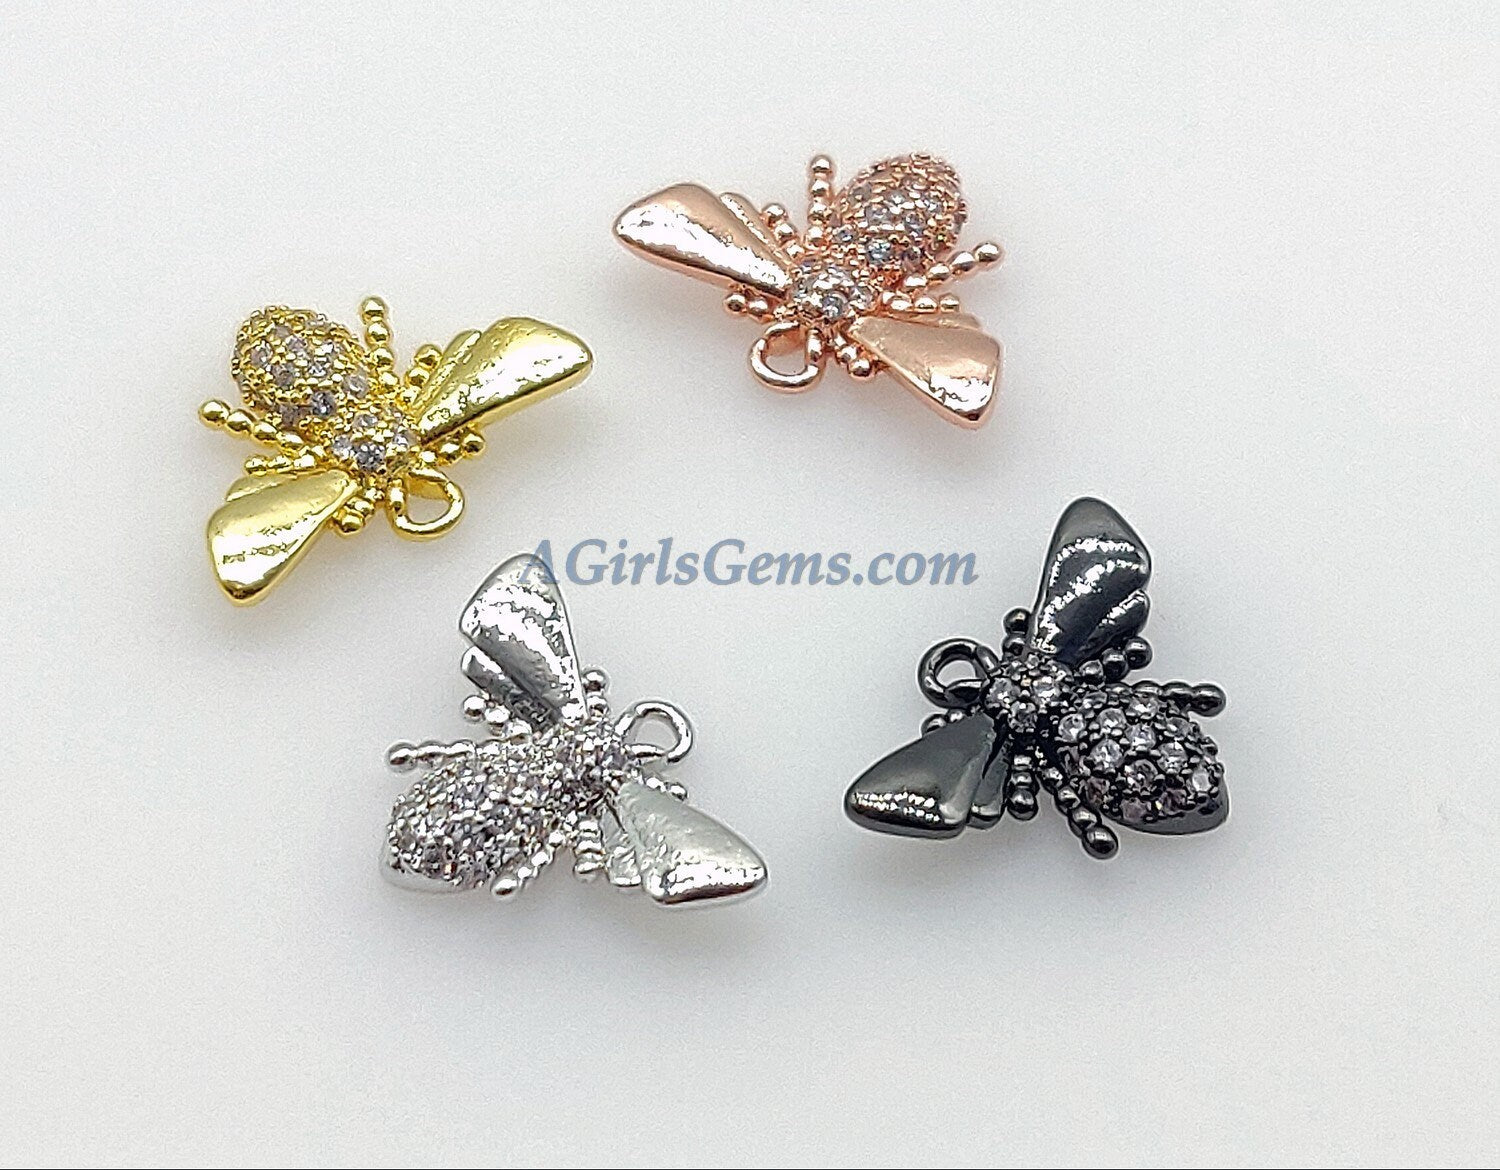 CZ Bee Charms, Tiny Bee Charms, 11 x 15 mm Small Bumble Bee Charms